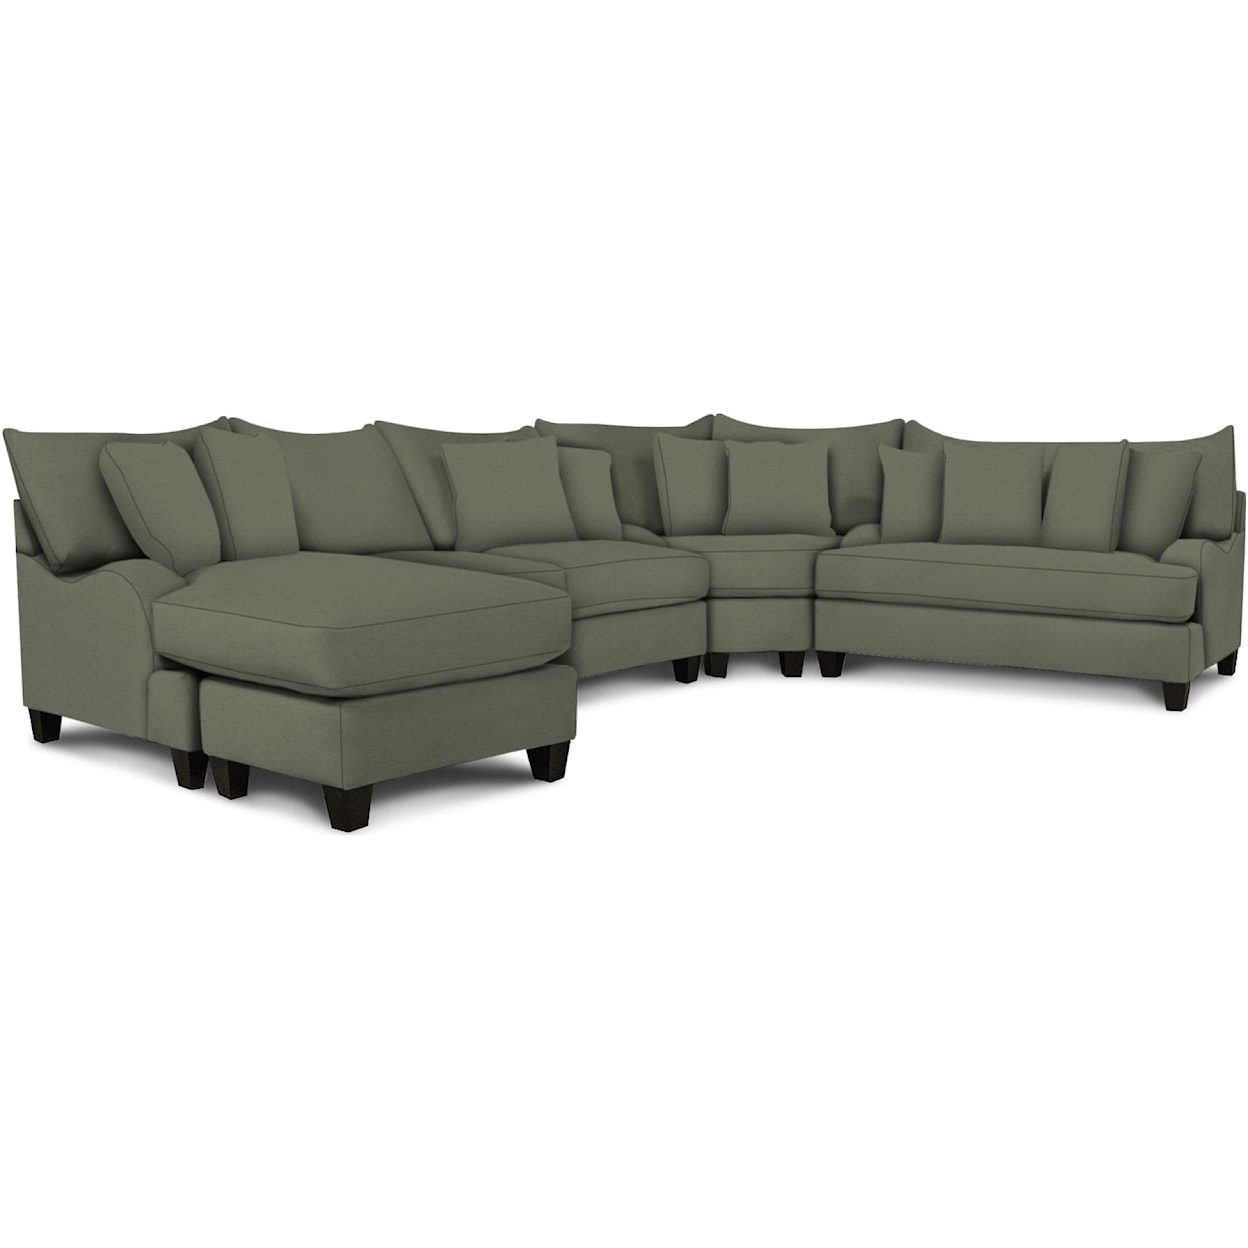 England 6N00 Series Catalina Sectional